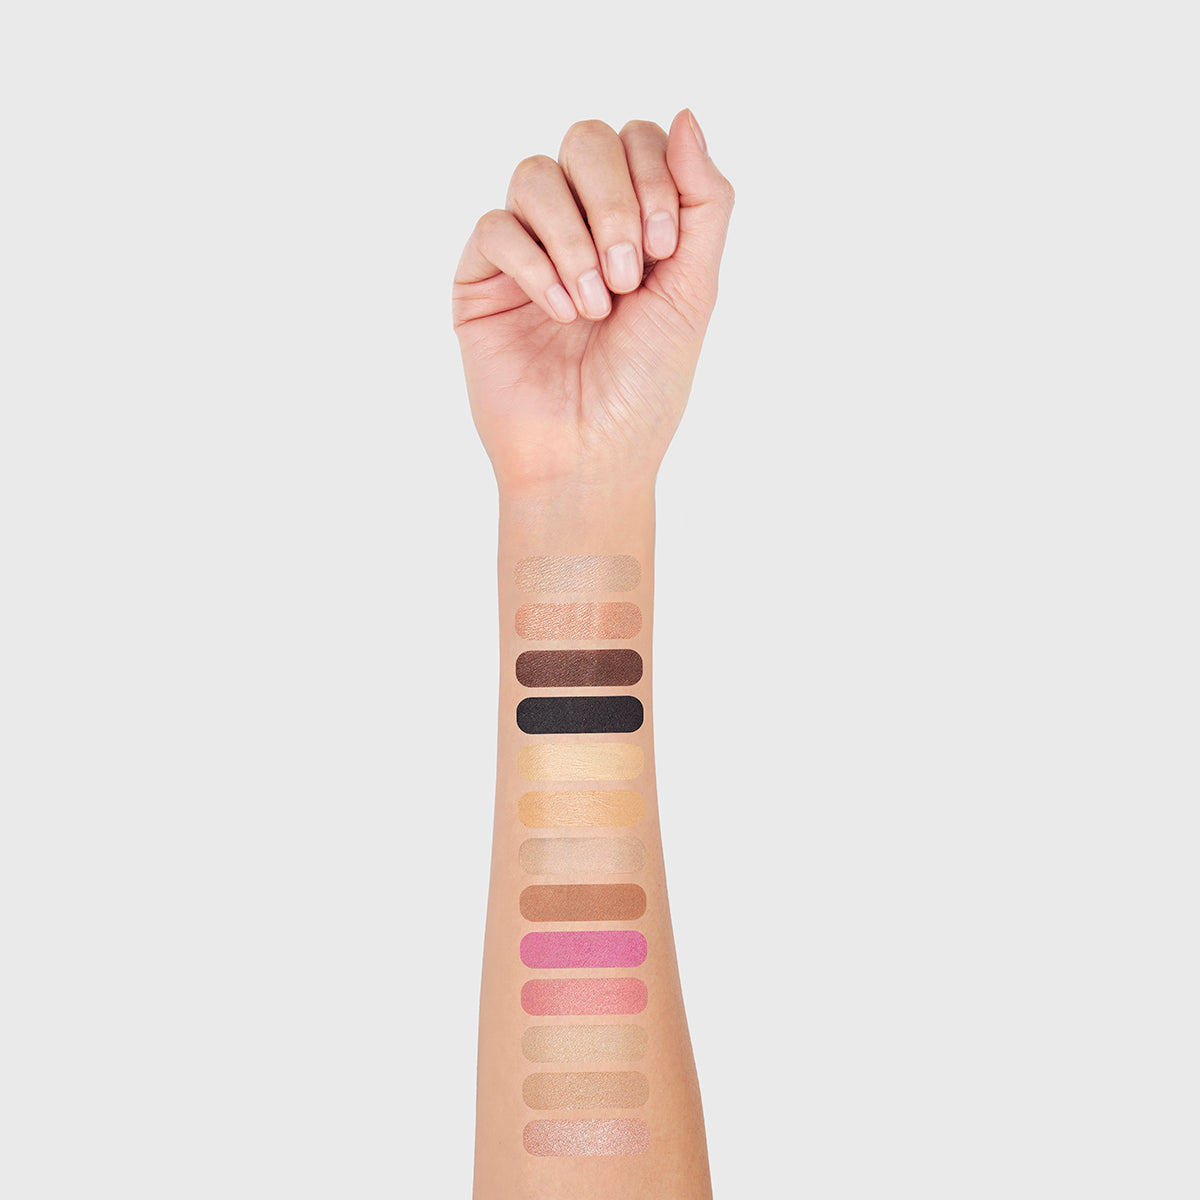 a photo of a light-skinned woman's arm with 13 swatches showing all 13 cosmetics that are found in the fold out face #2 medium light palette